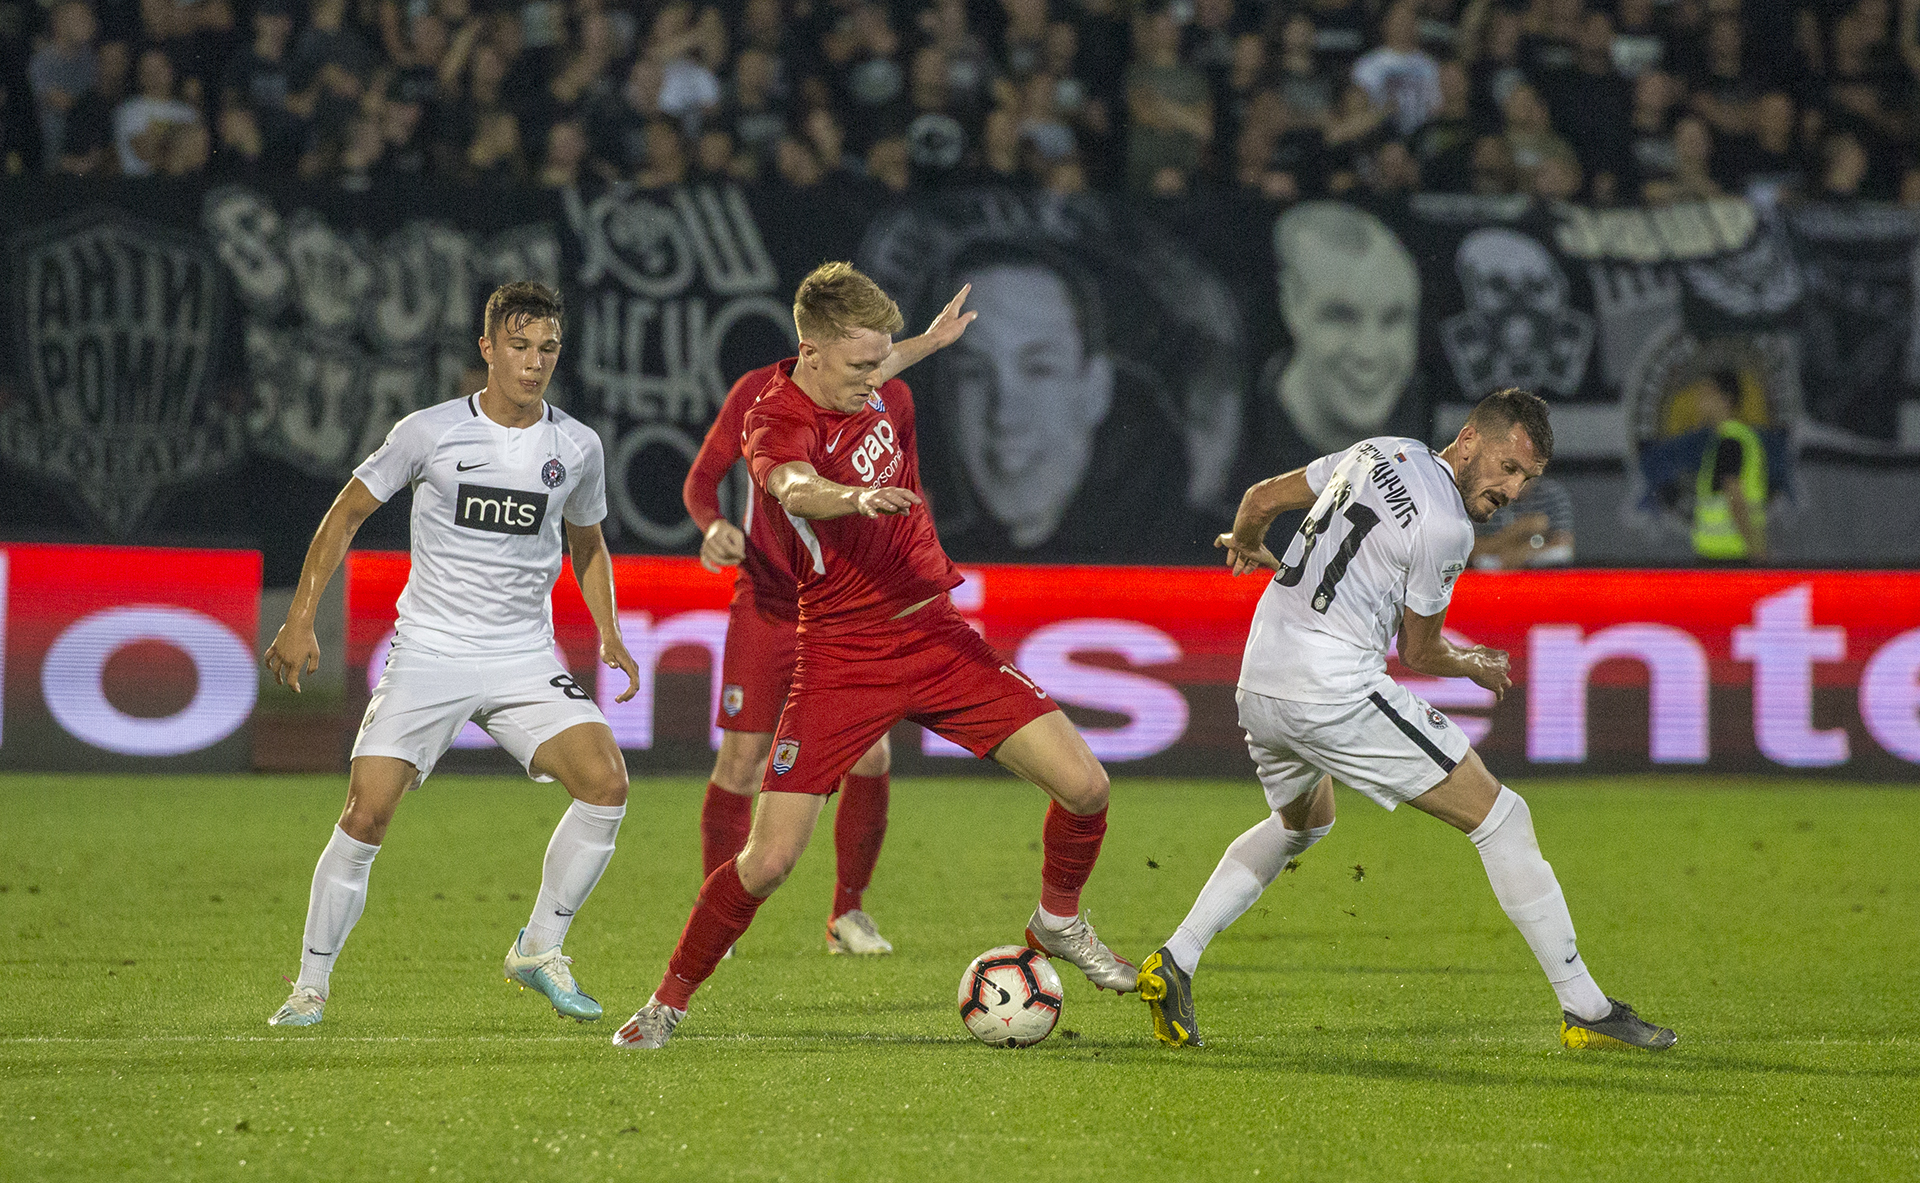 Declan Poole briefly gets the better of the Partizan defence | © NCM Media